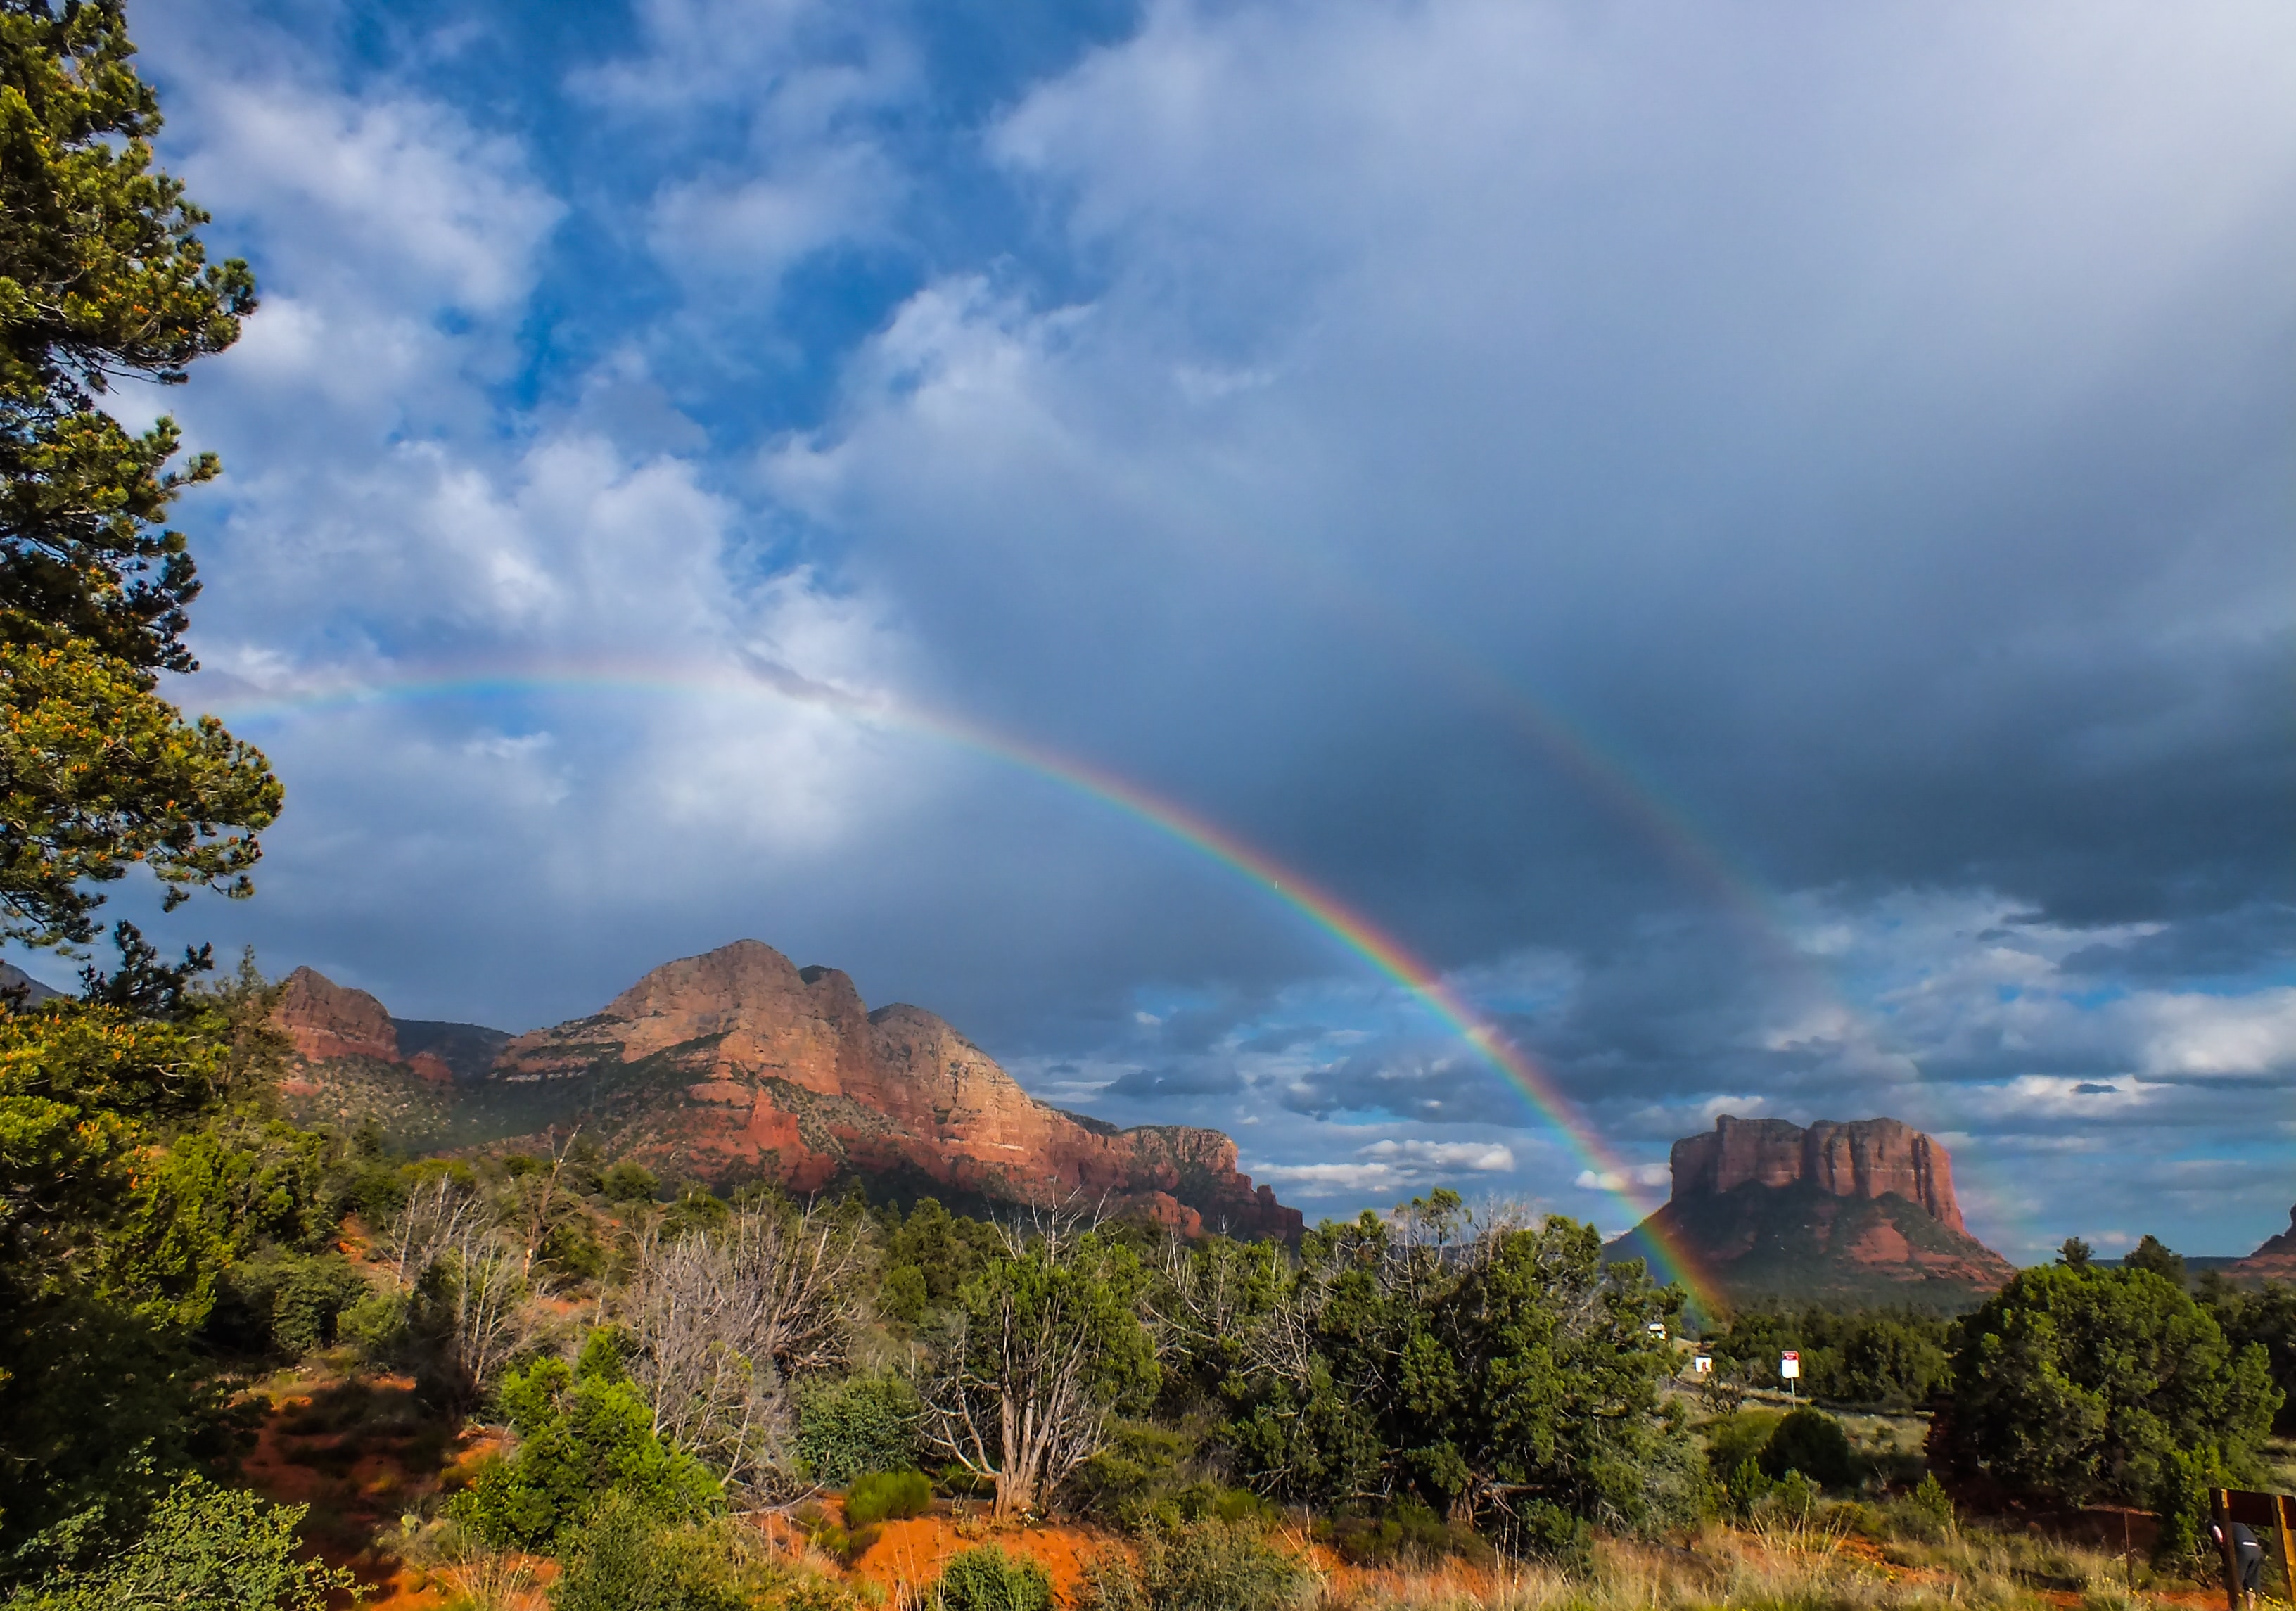 Double rainbows in this picture of Sedona.